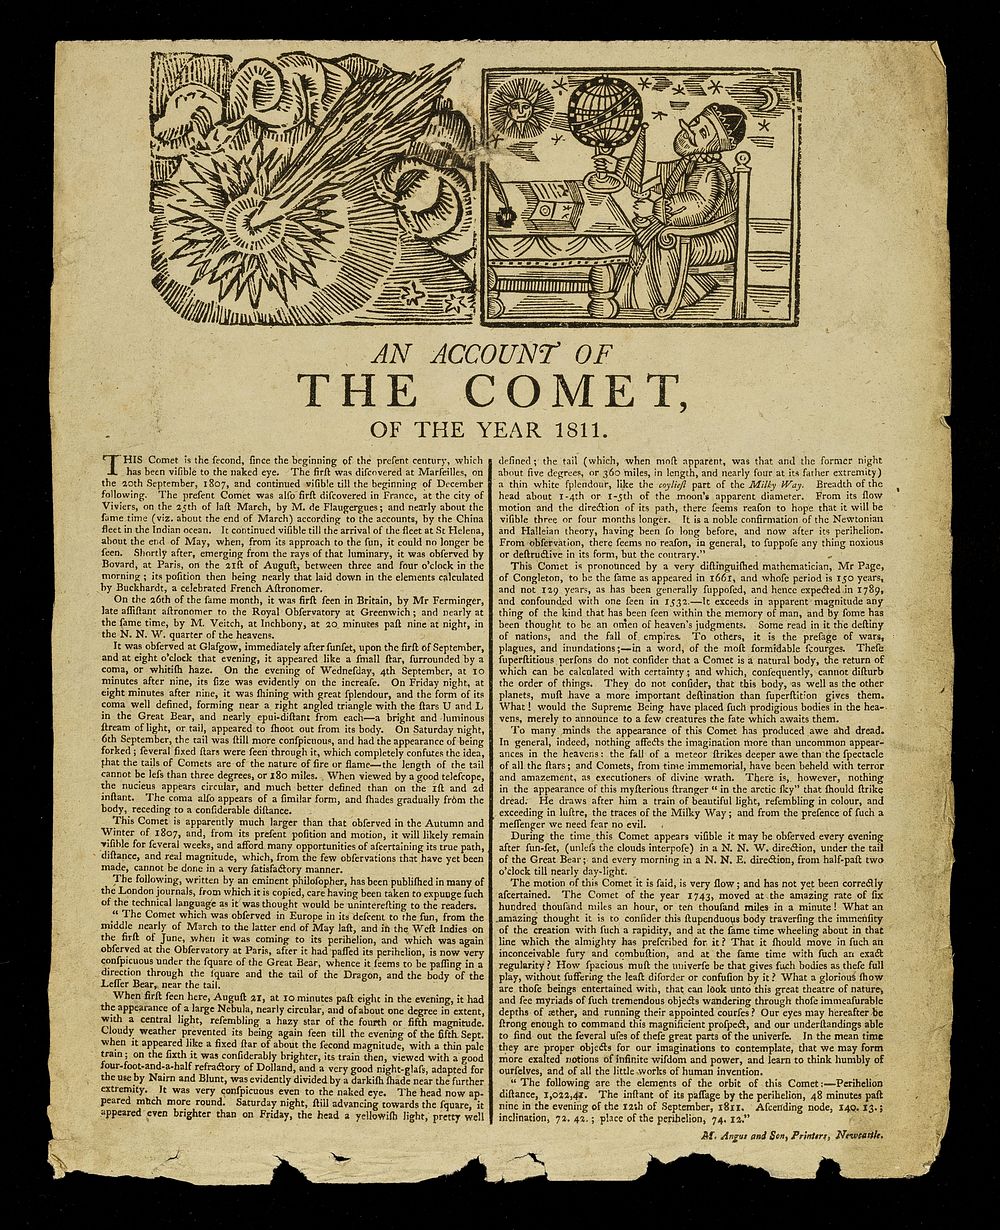 An account of the comet of the year 1811.